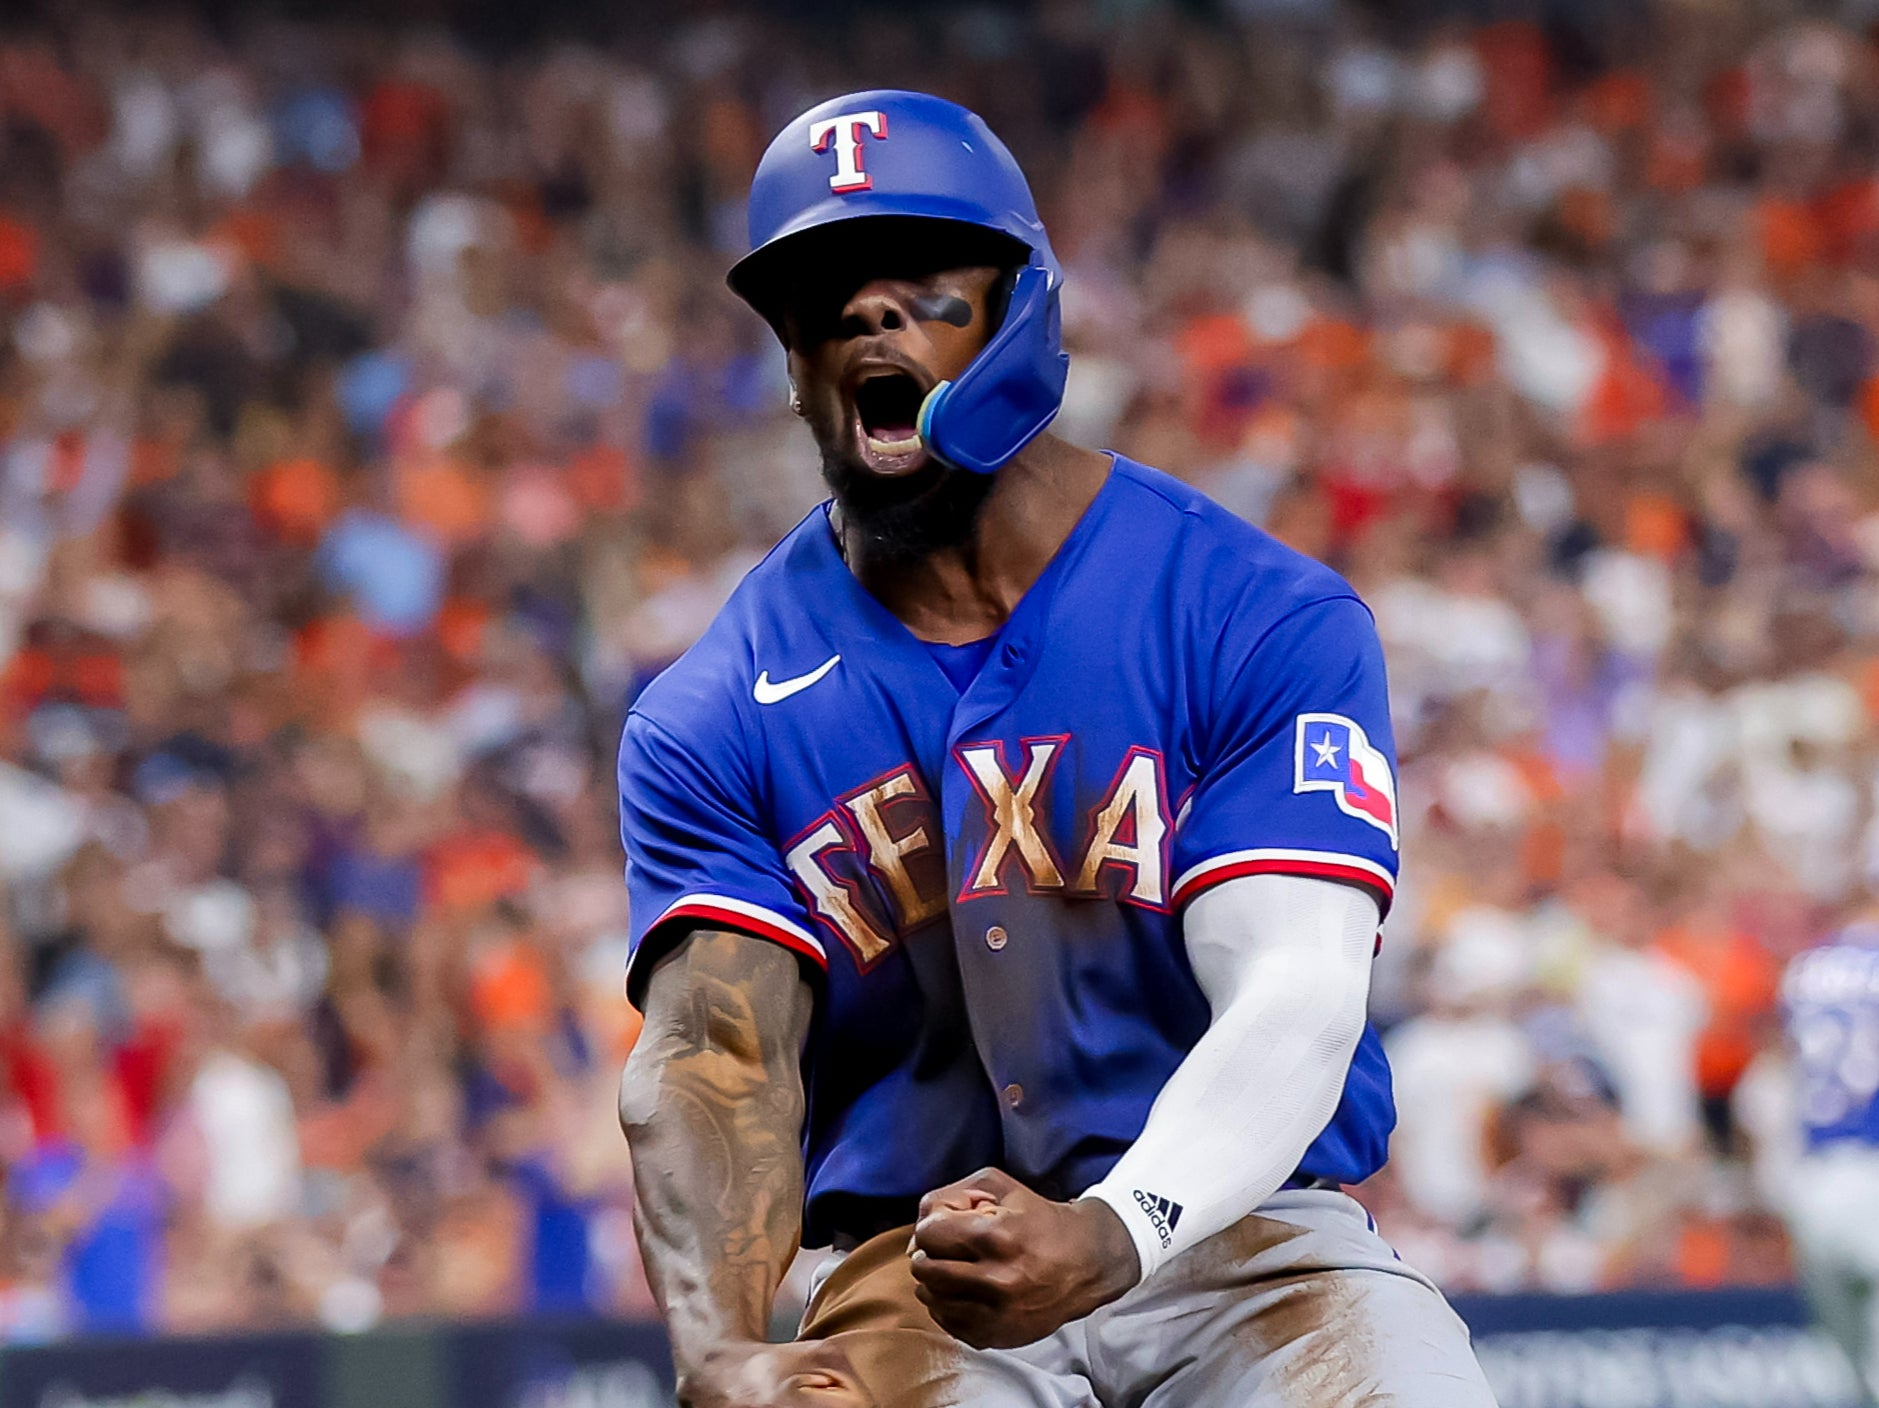 Texas Rangers right fielder Adolis Garcia reacts after scoring against the Houston Astros